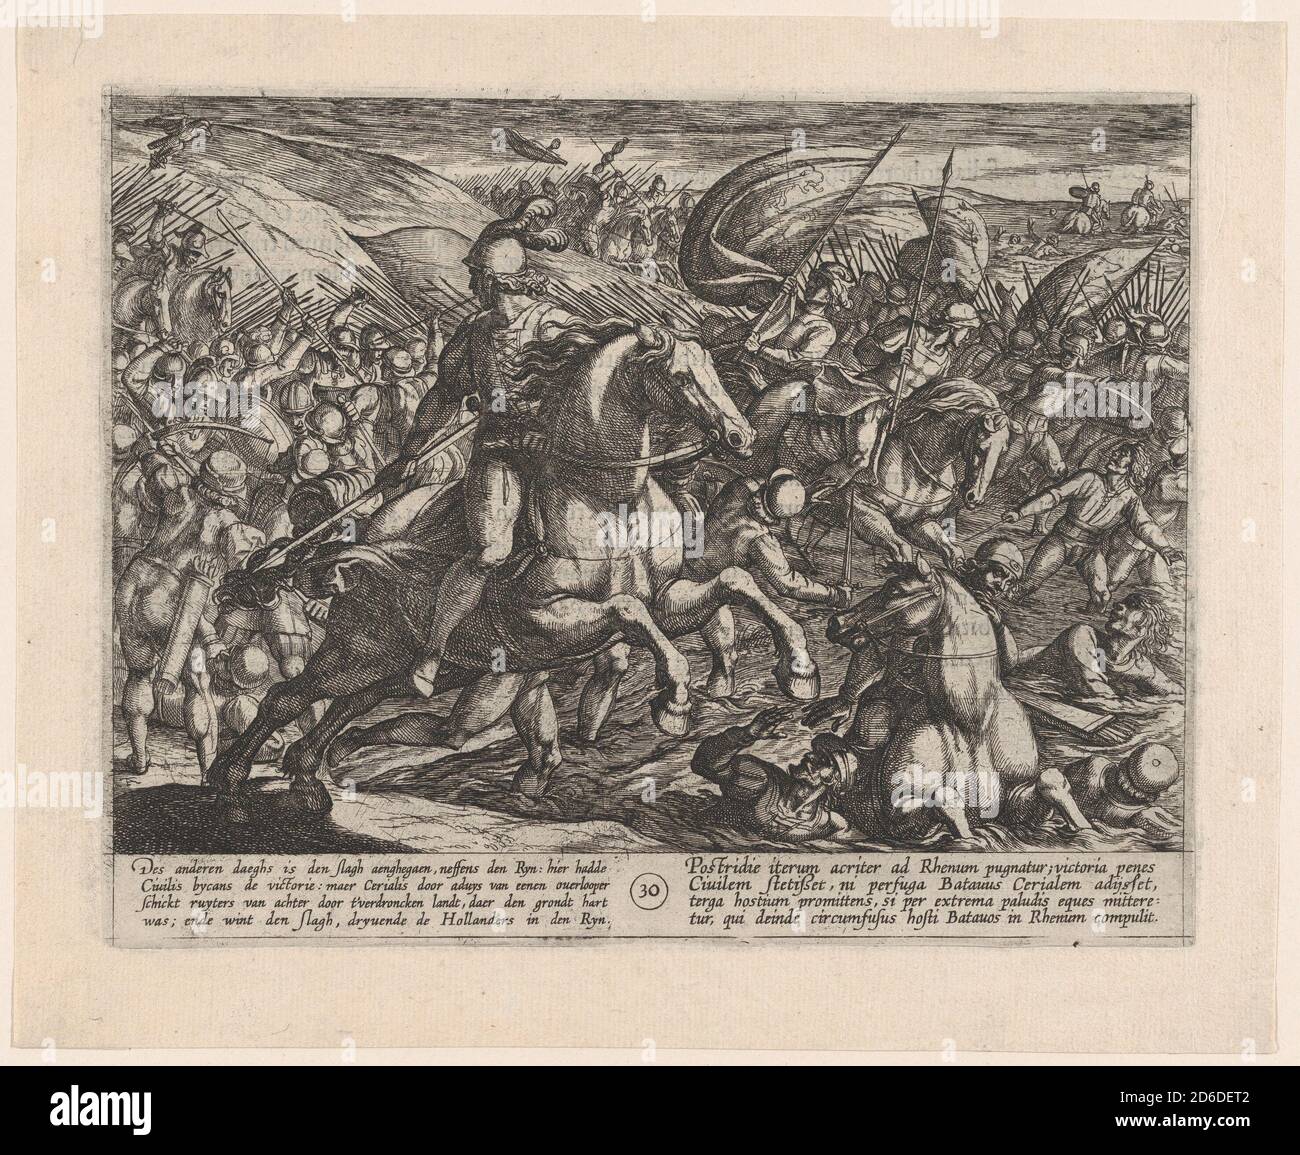 Plate 30: Cerialis Driving the Dutch into the Rhine, from The War of the Romans Against the Batavians, 1611. Stock Photo